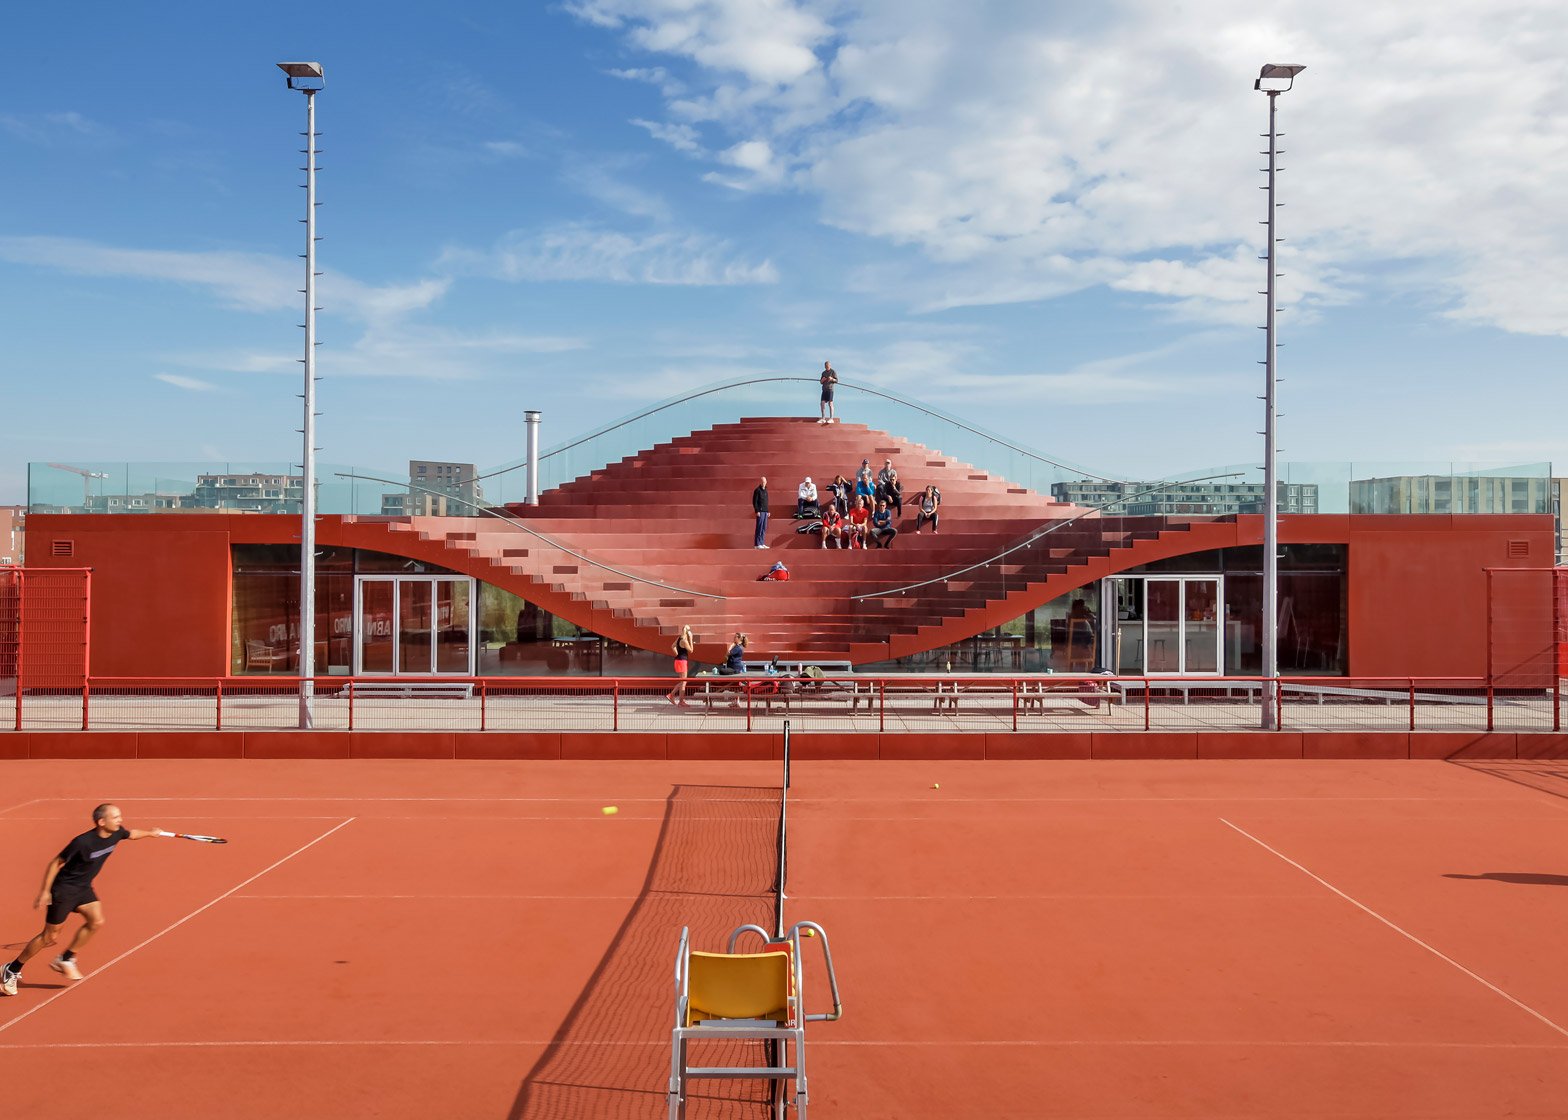 MVRDVs tennis clubhouse has a seating bowl on the roof